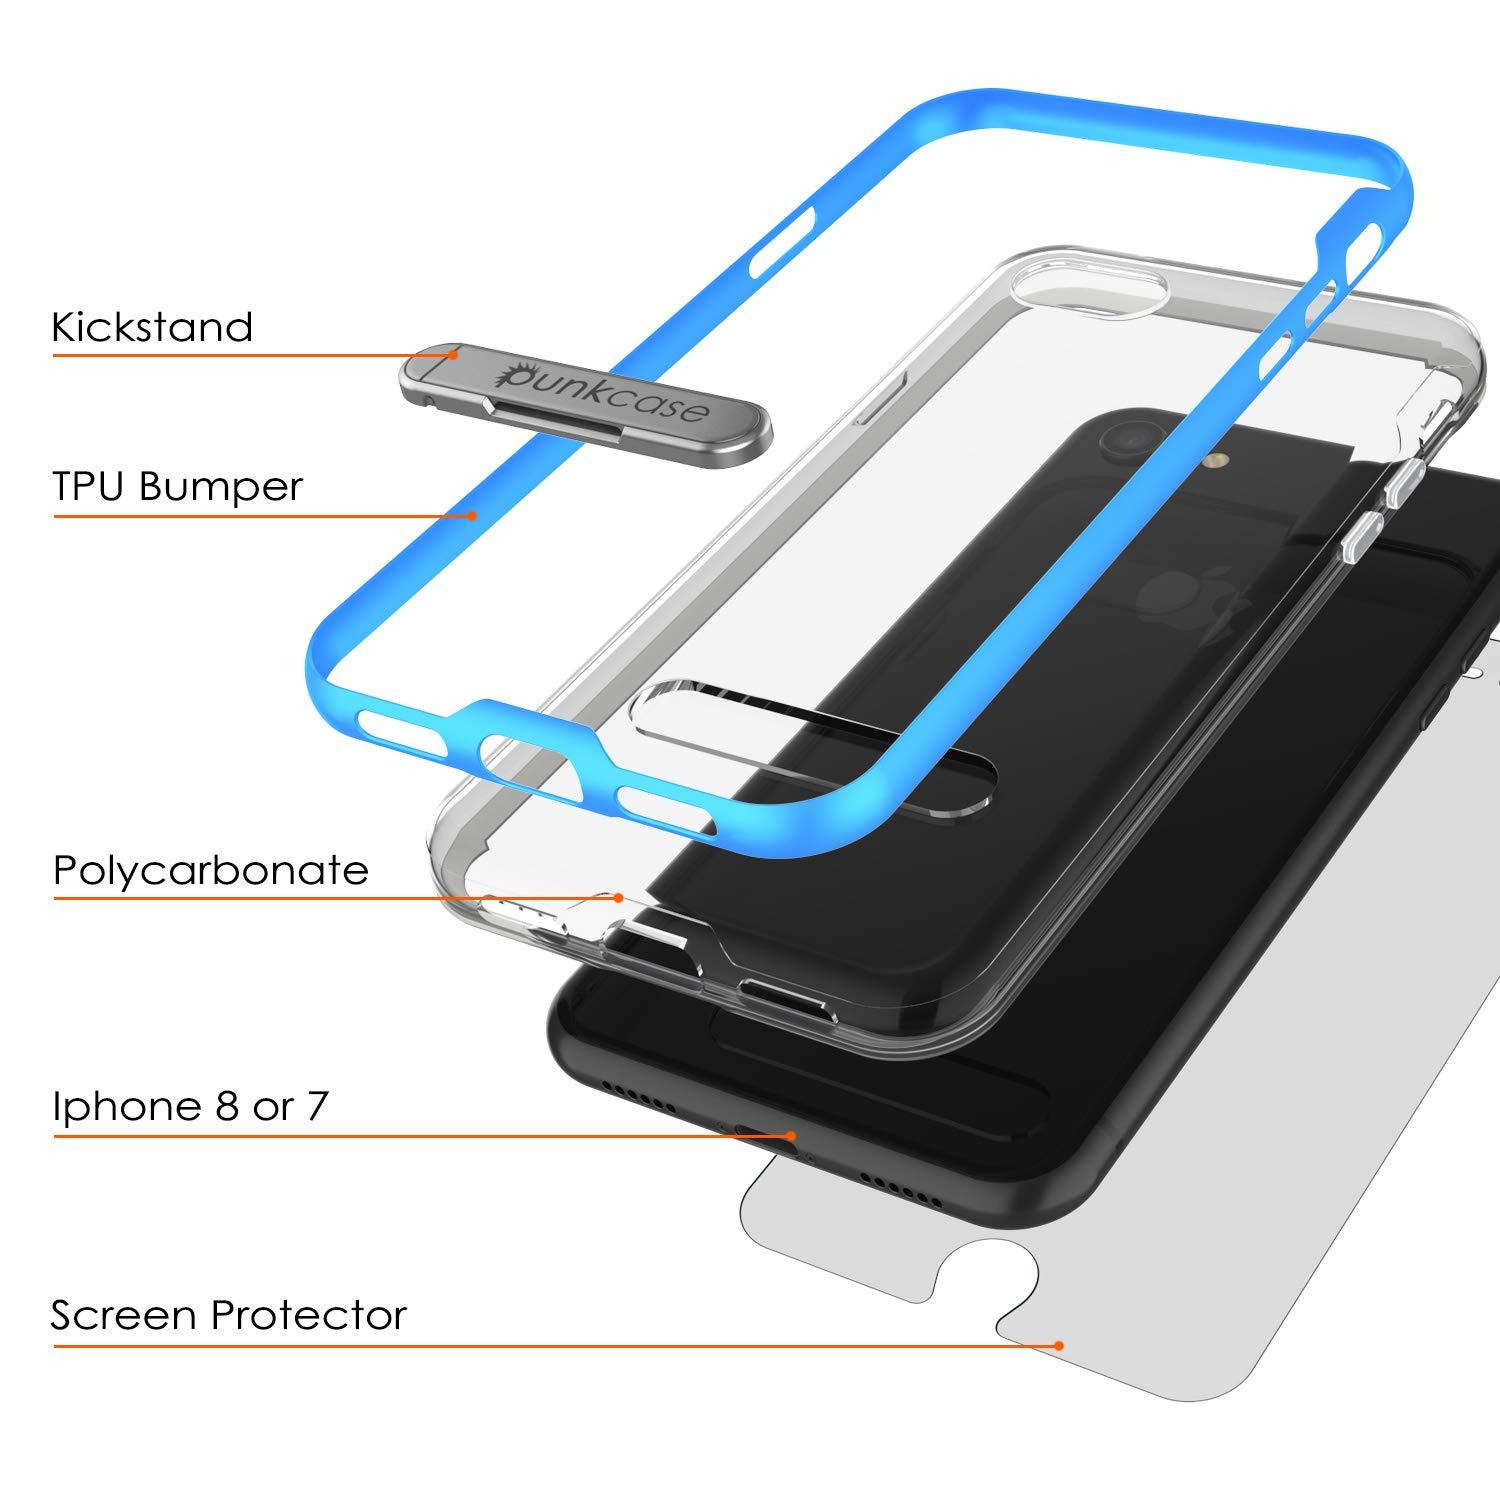 PunkCase iPhone 8 Lucid 3.0 Screen Protector W/ Anti-Shock Case [Blue]